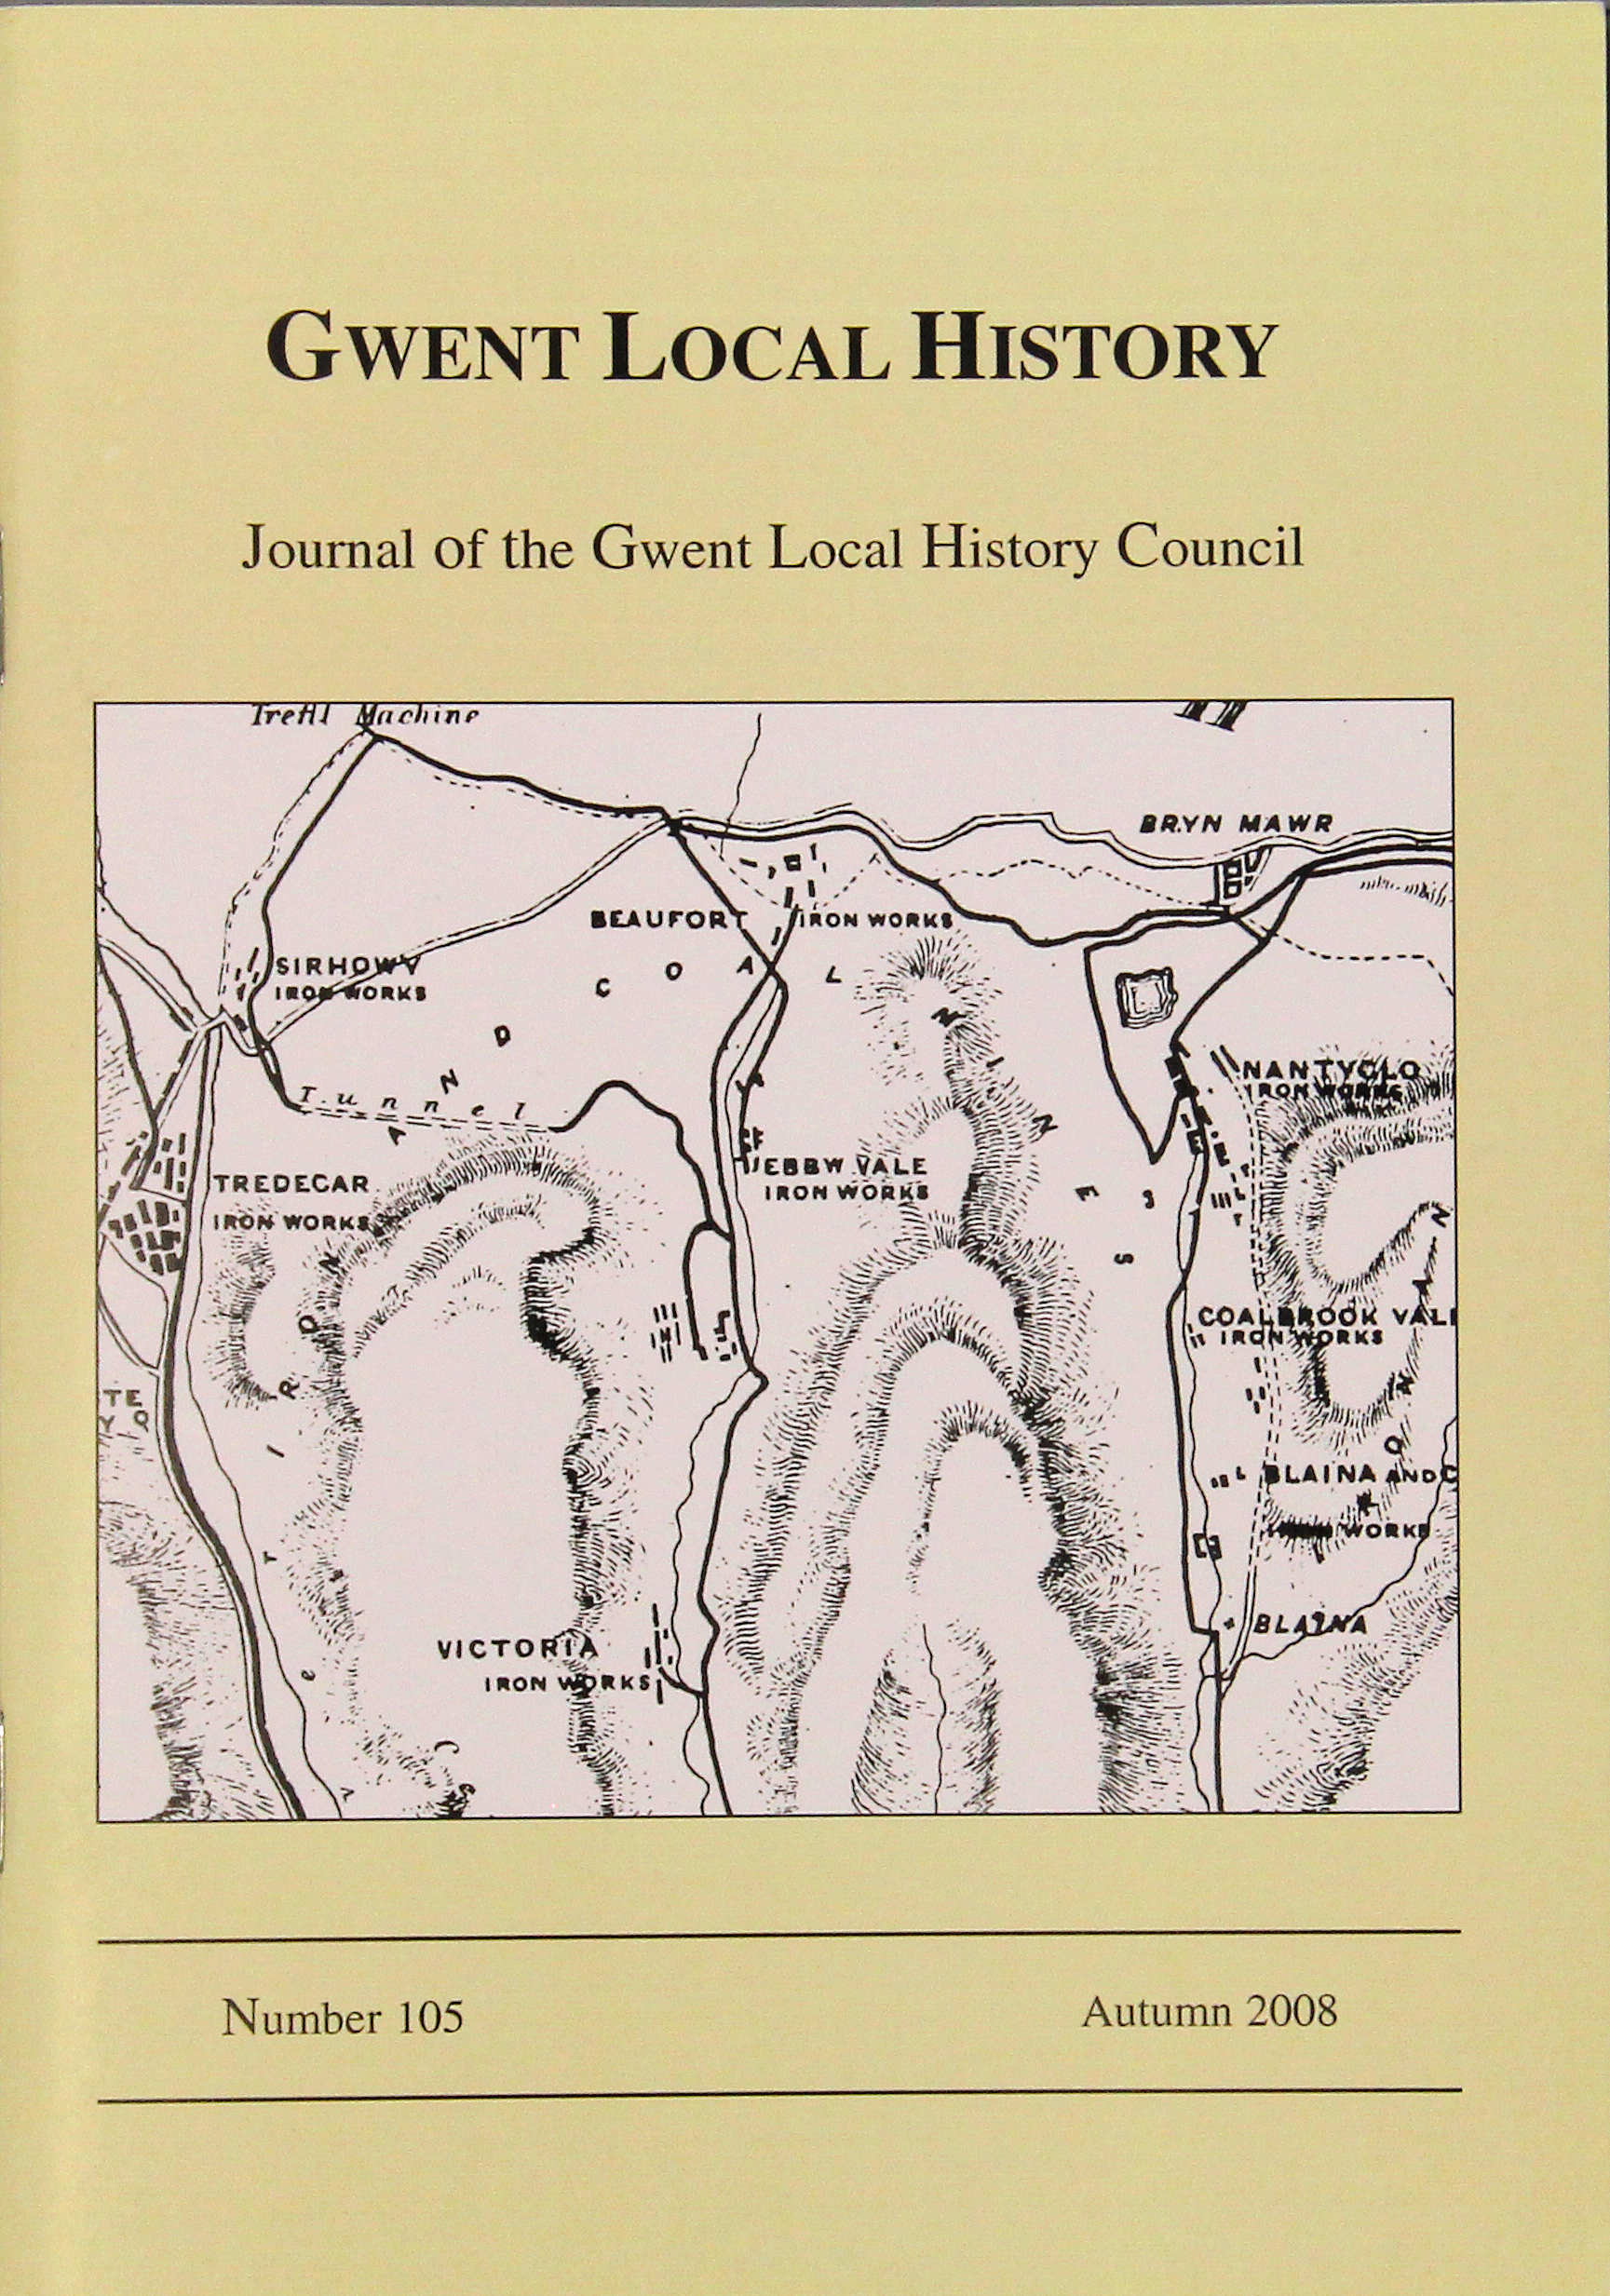 Gwent Local History: Journal of the Gwent Local History Council No.105, Autumn 2008, £2.00